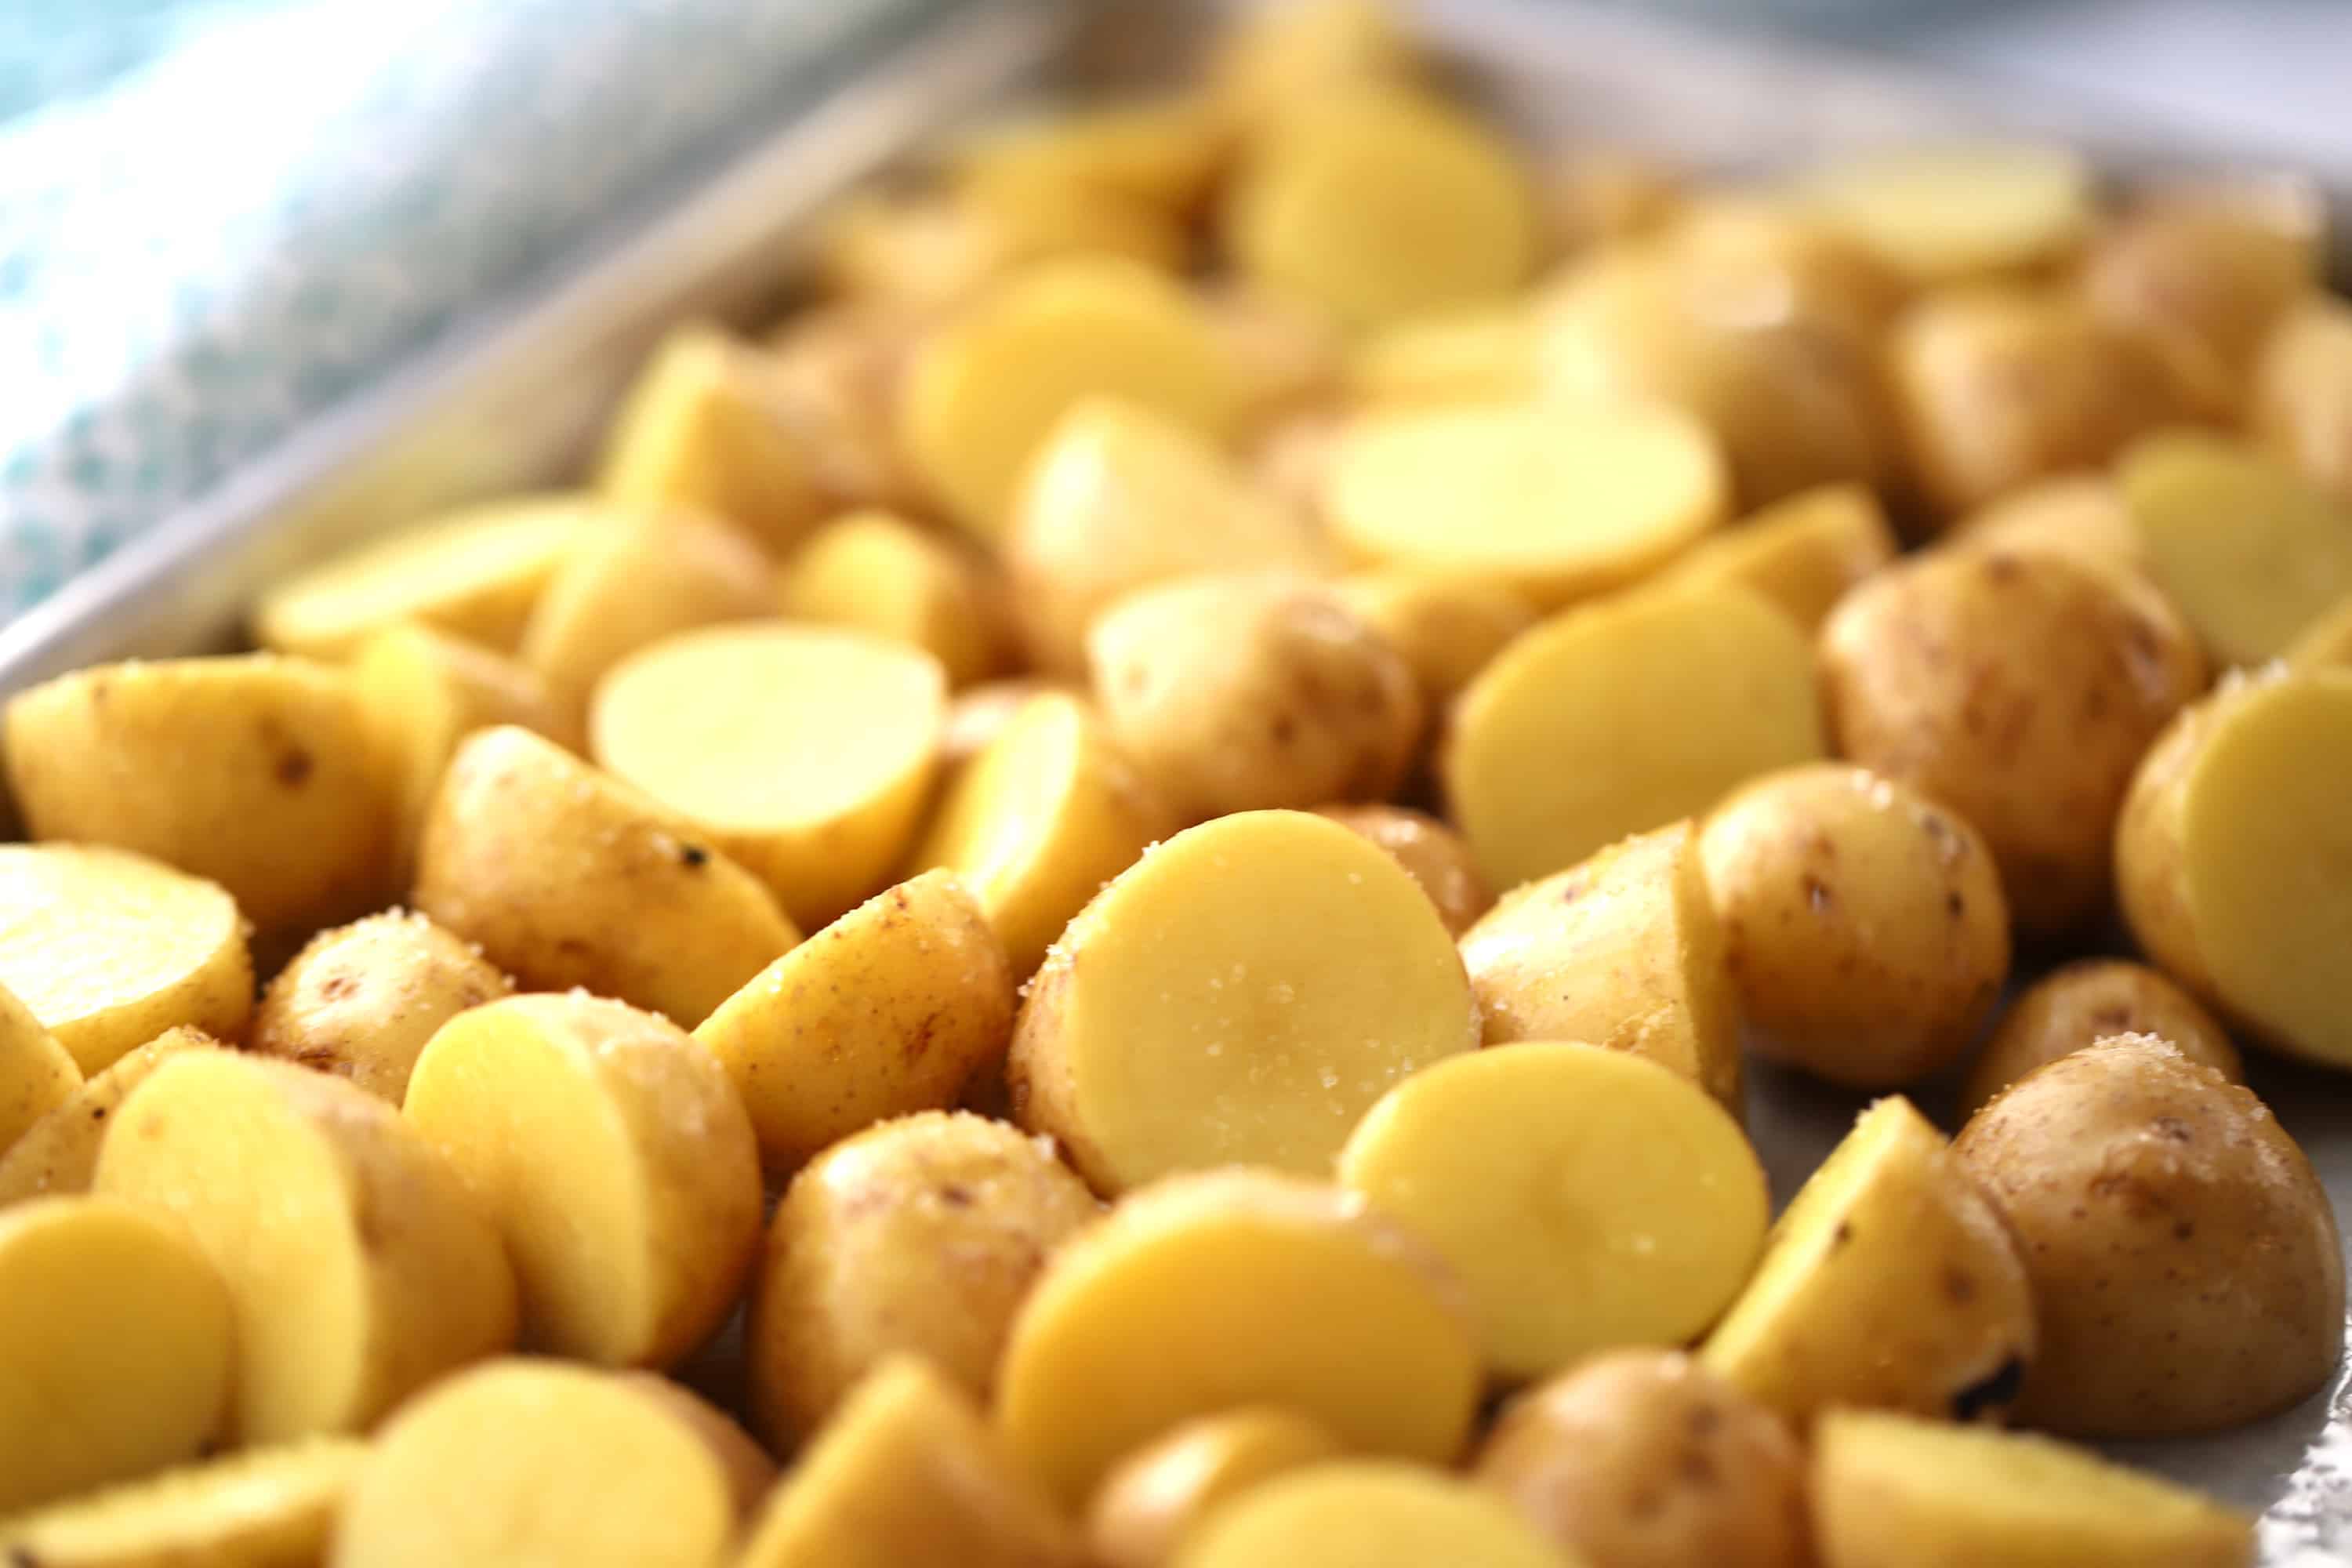 Small potatoes cut in half and spread out on a baking sheet.